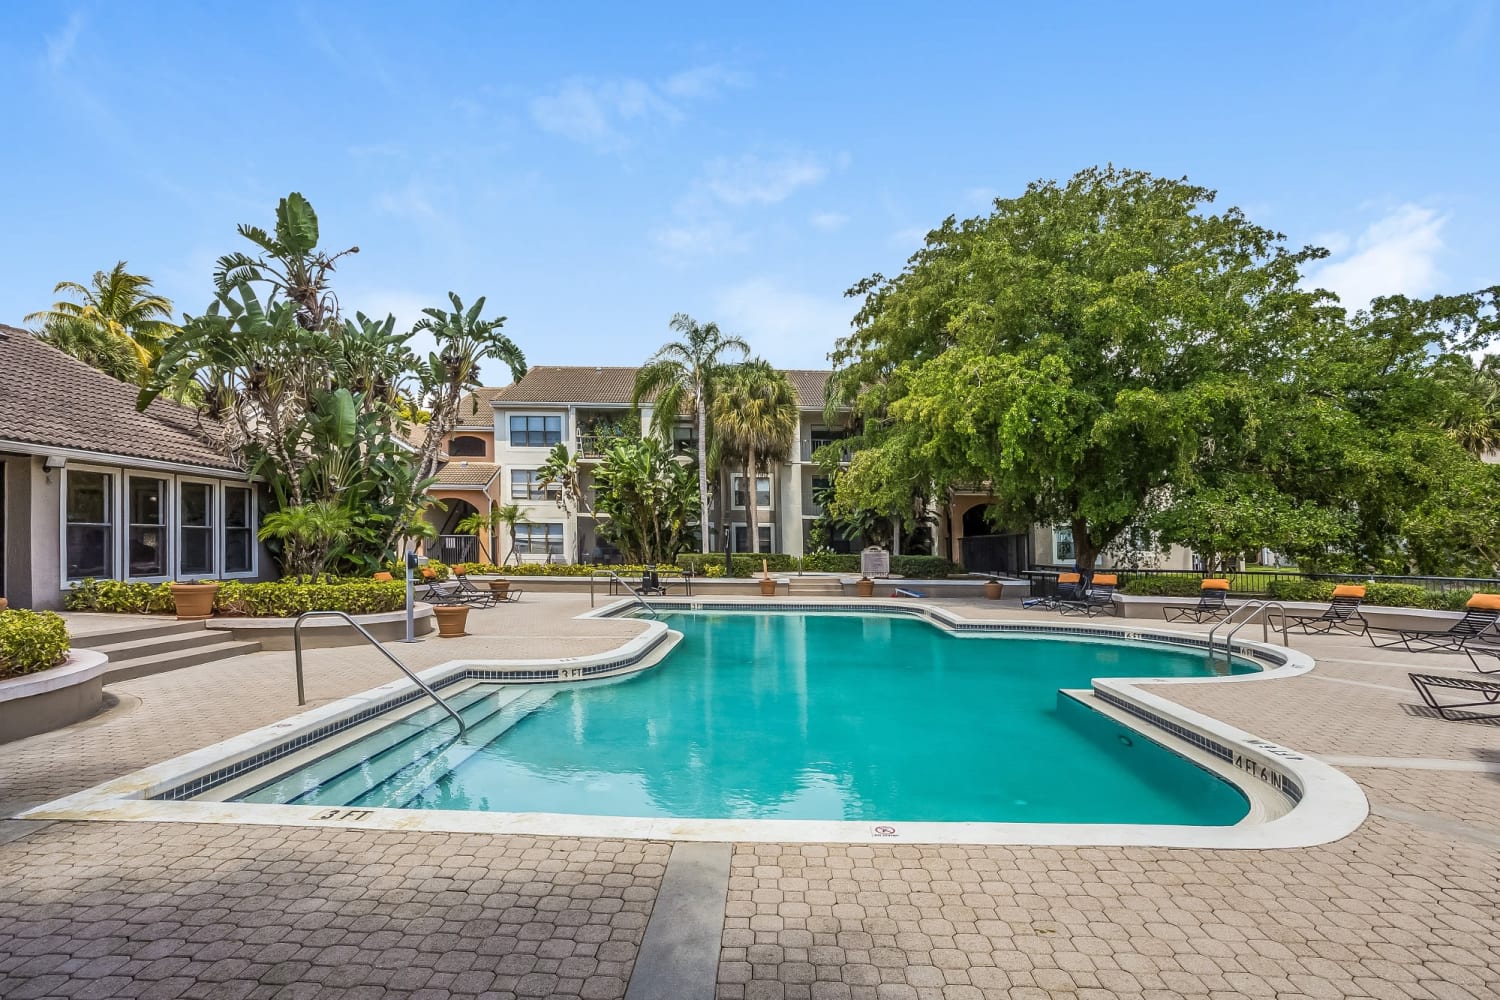 Our Apartments in Boca Raton, Florida offer a Swimming Pool